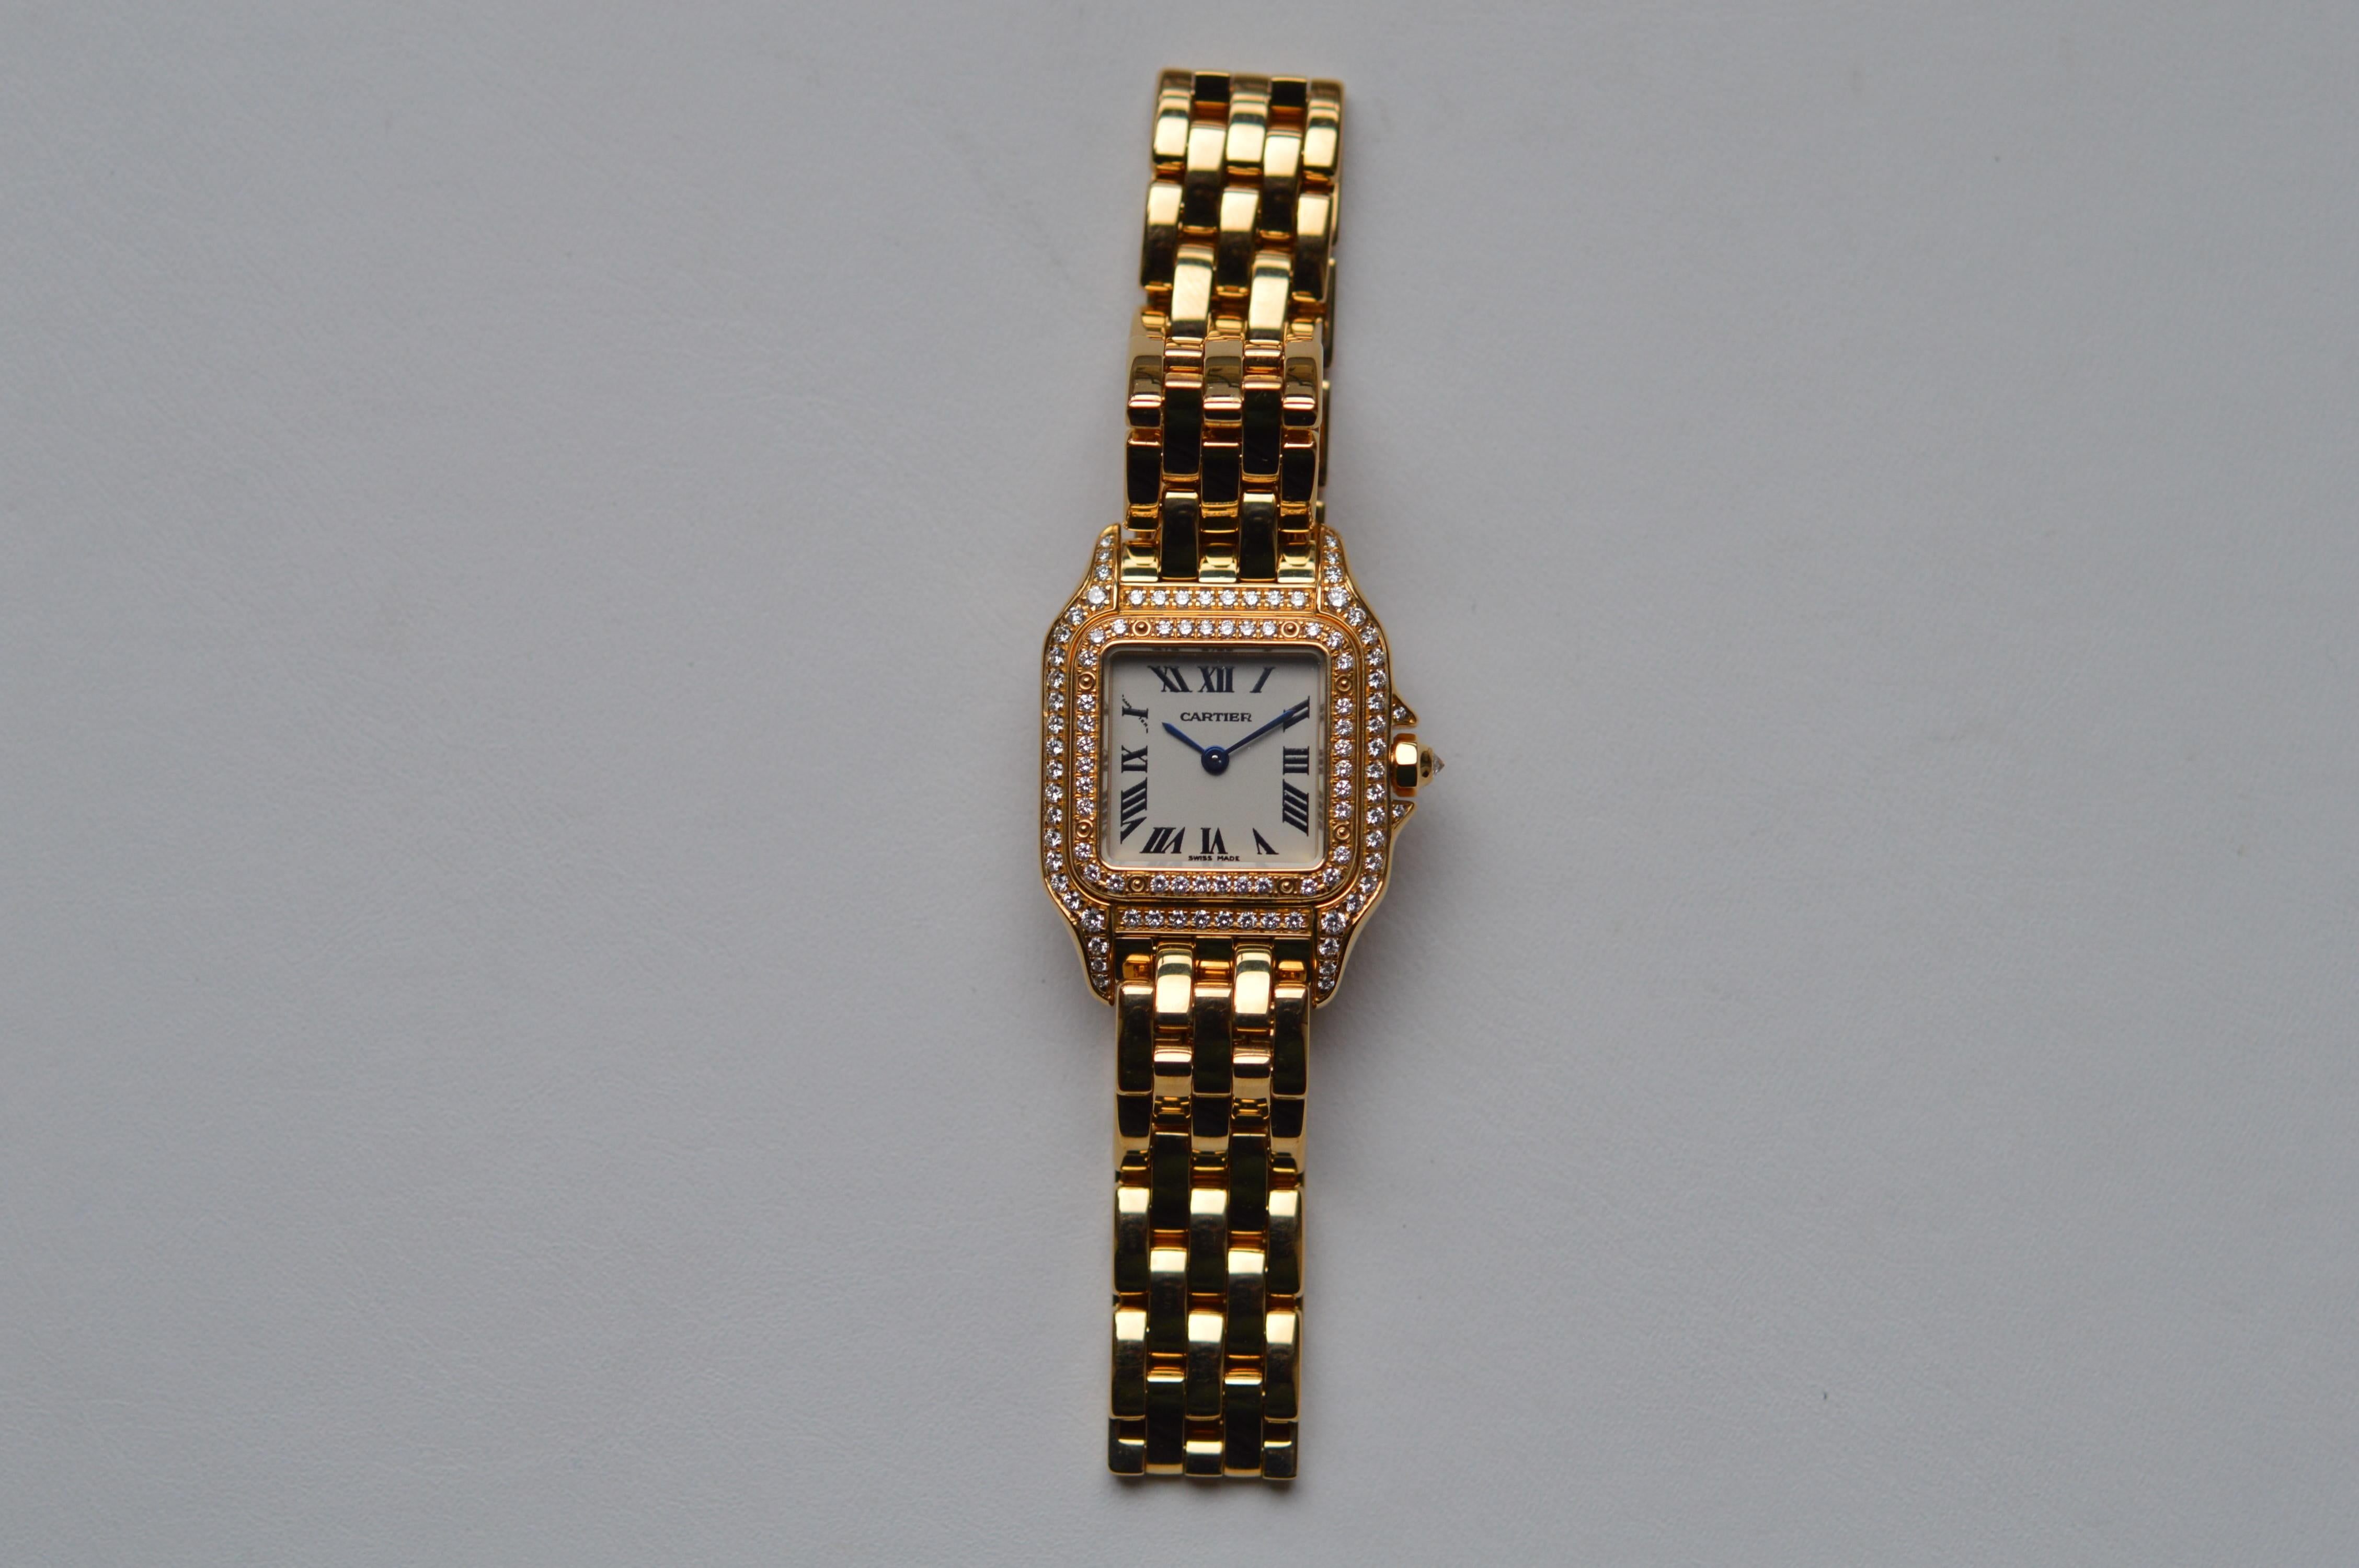 Cartier Panthère SM Diamond Case
Reference n°WF3072B9
SM (Small Model) Size
20mm X 28mm Size
18K Yellow Gold
Cream / White Dial
Custom diamond Setting
Set with 99 Round Diamond for a total weight of 0.73 carats
Water Resistant 3ATM - 30M - 100